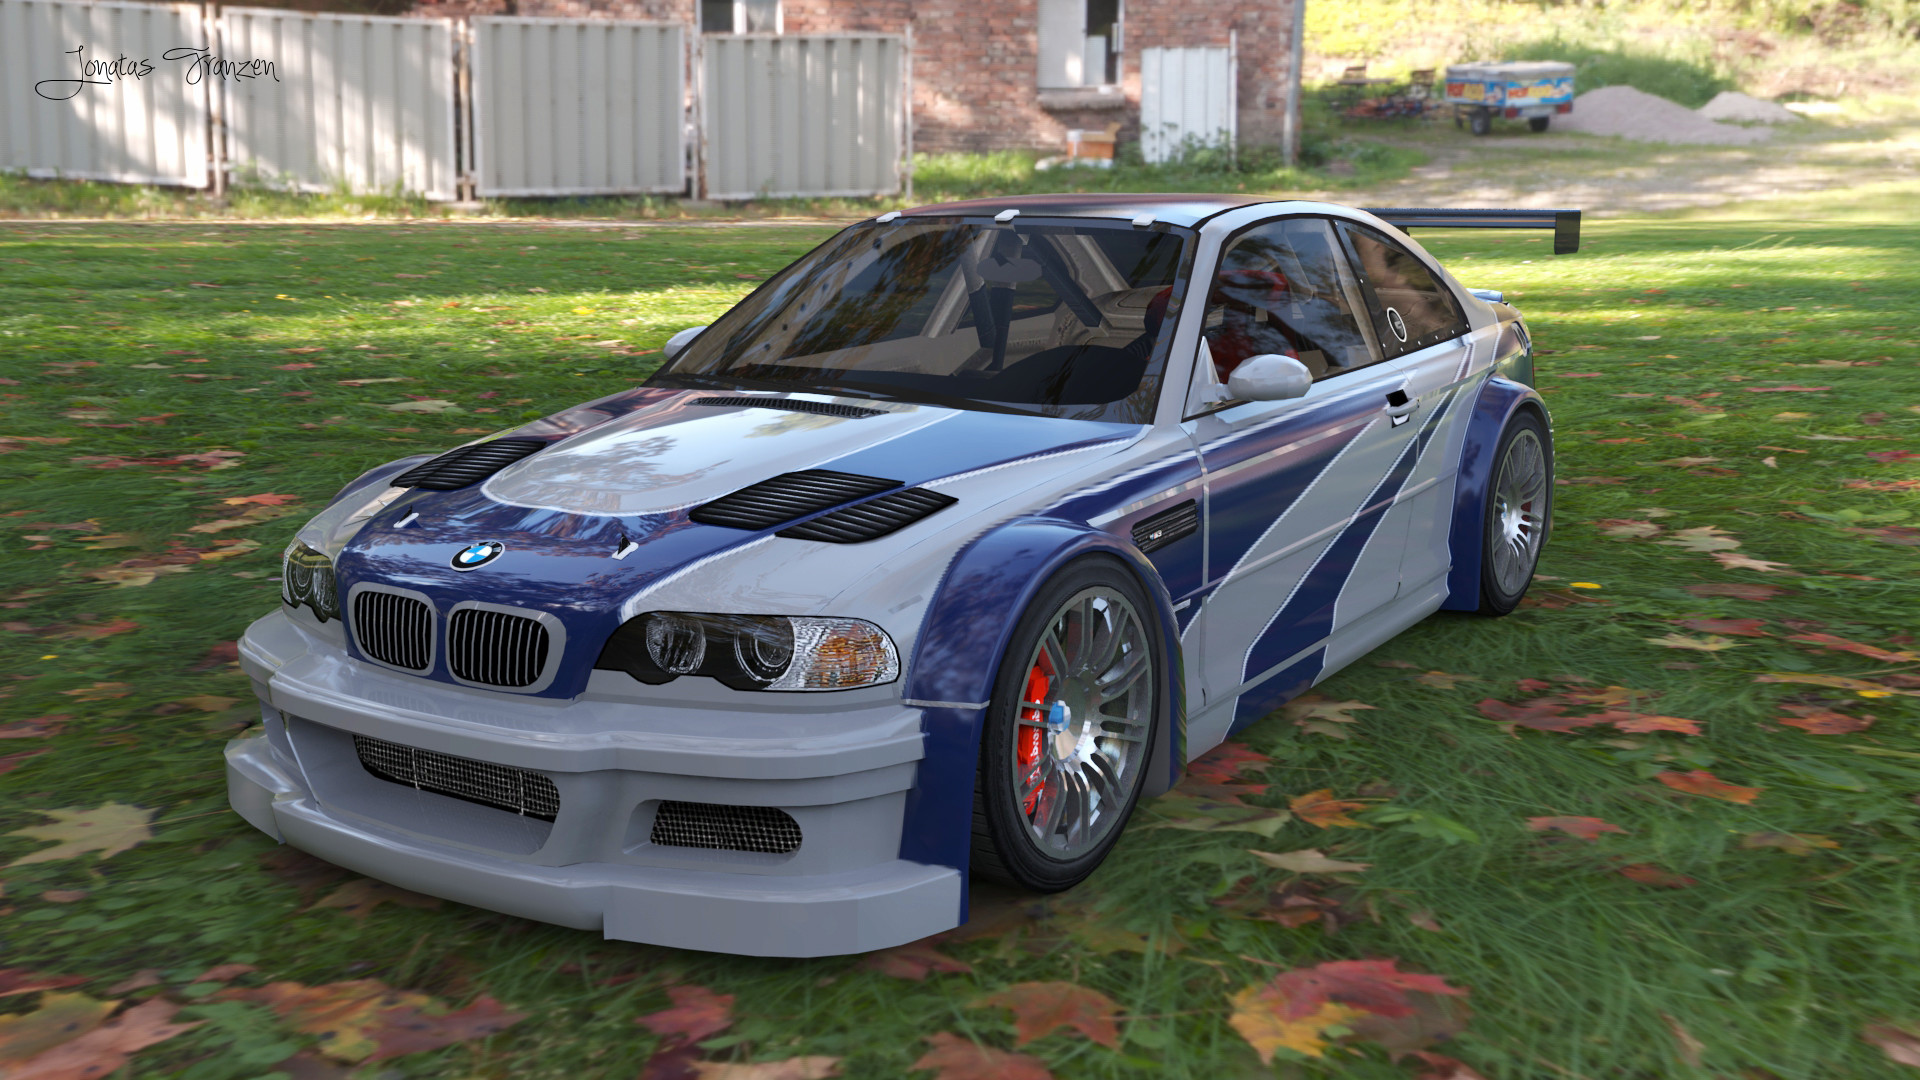 Need For Speed Most Wanted Razor Bmw M3 Gtr Topworldauto Photos Of